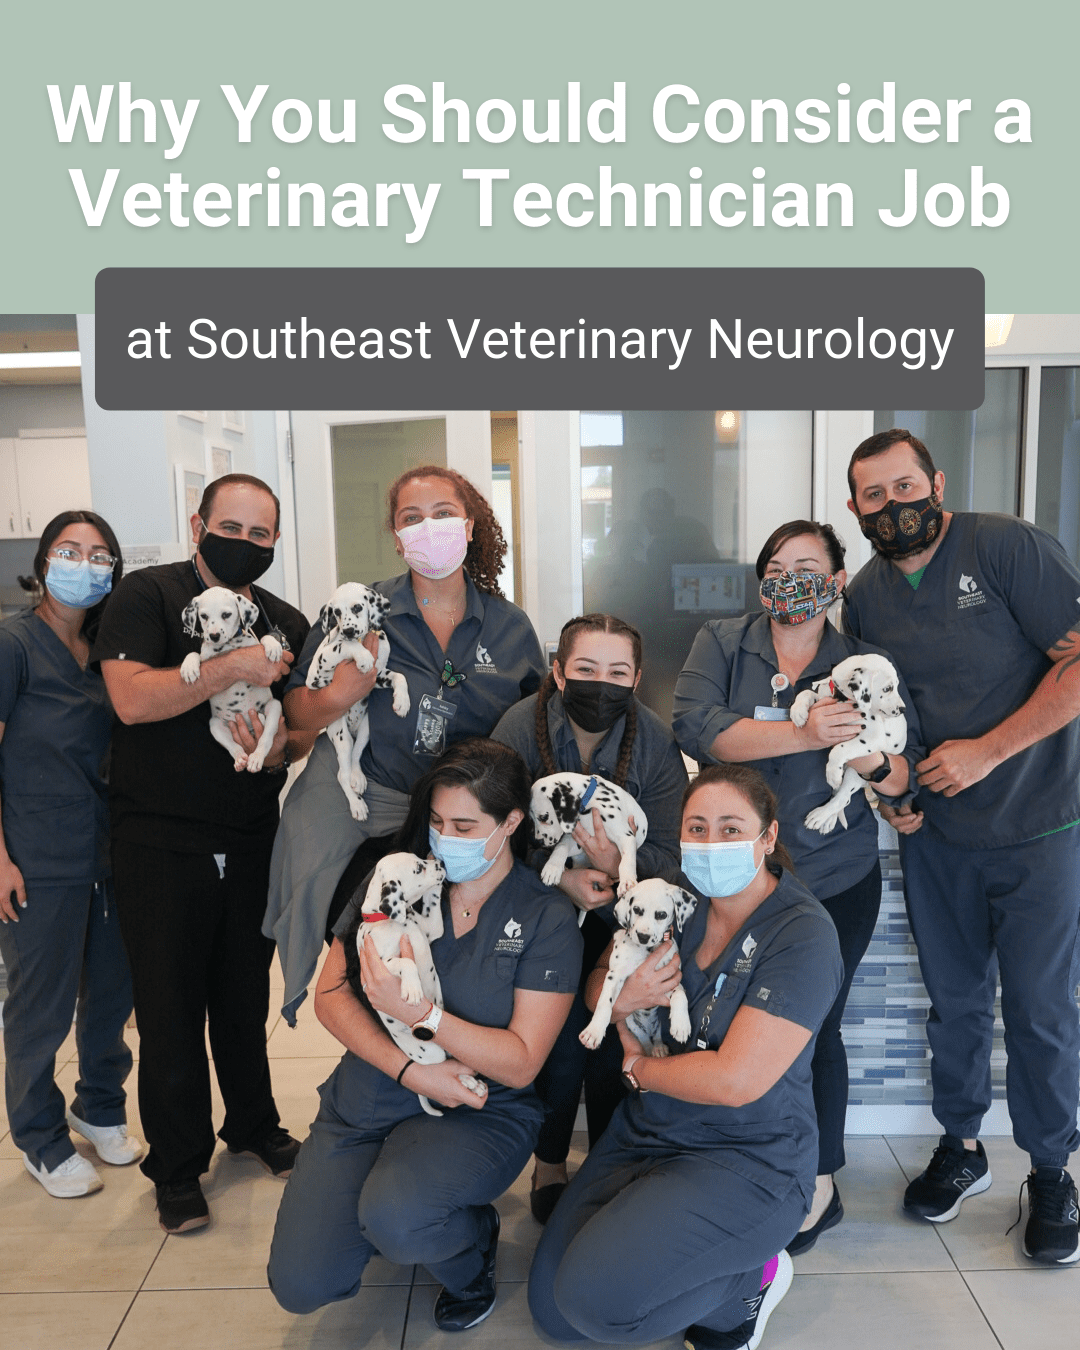 Why You Should Consider a Veterinary Technician Job at SEVN